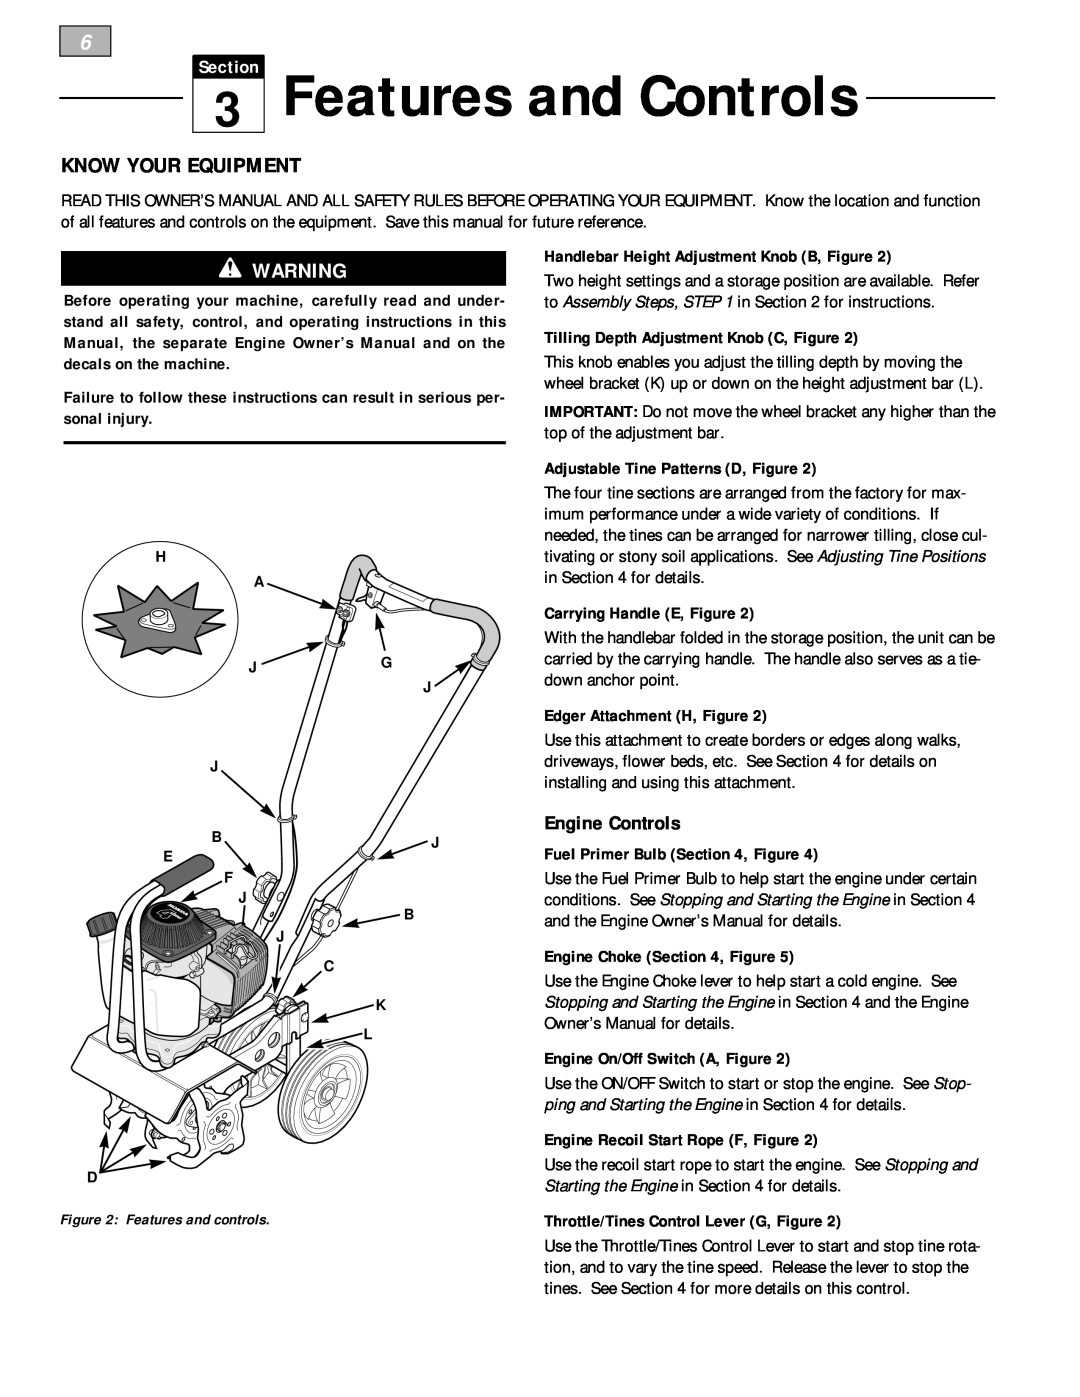 Bolens 12228 owner manual Features and Controls, Know Your Equipment, Engine Controls, Section 